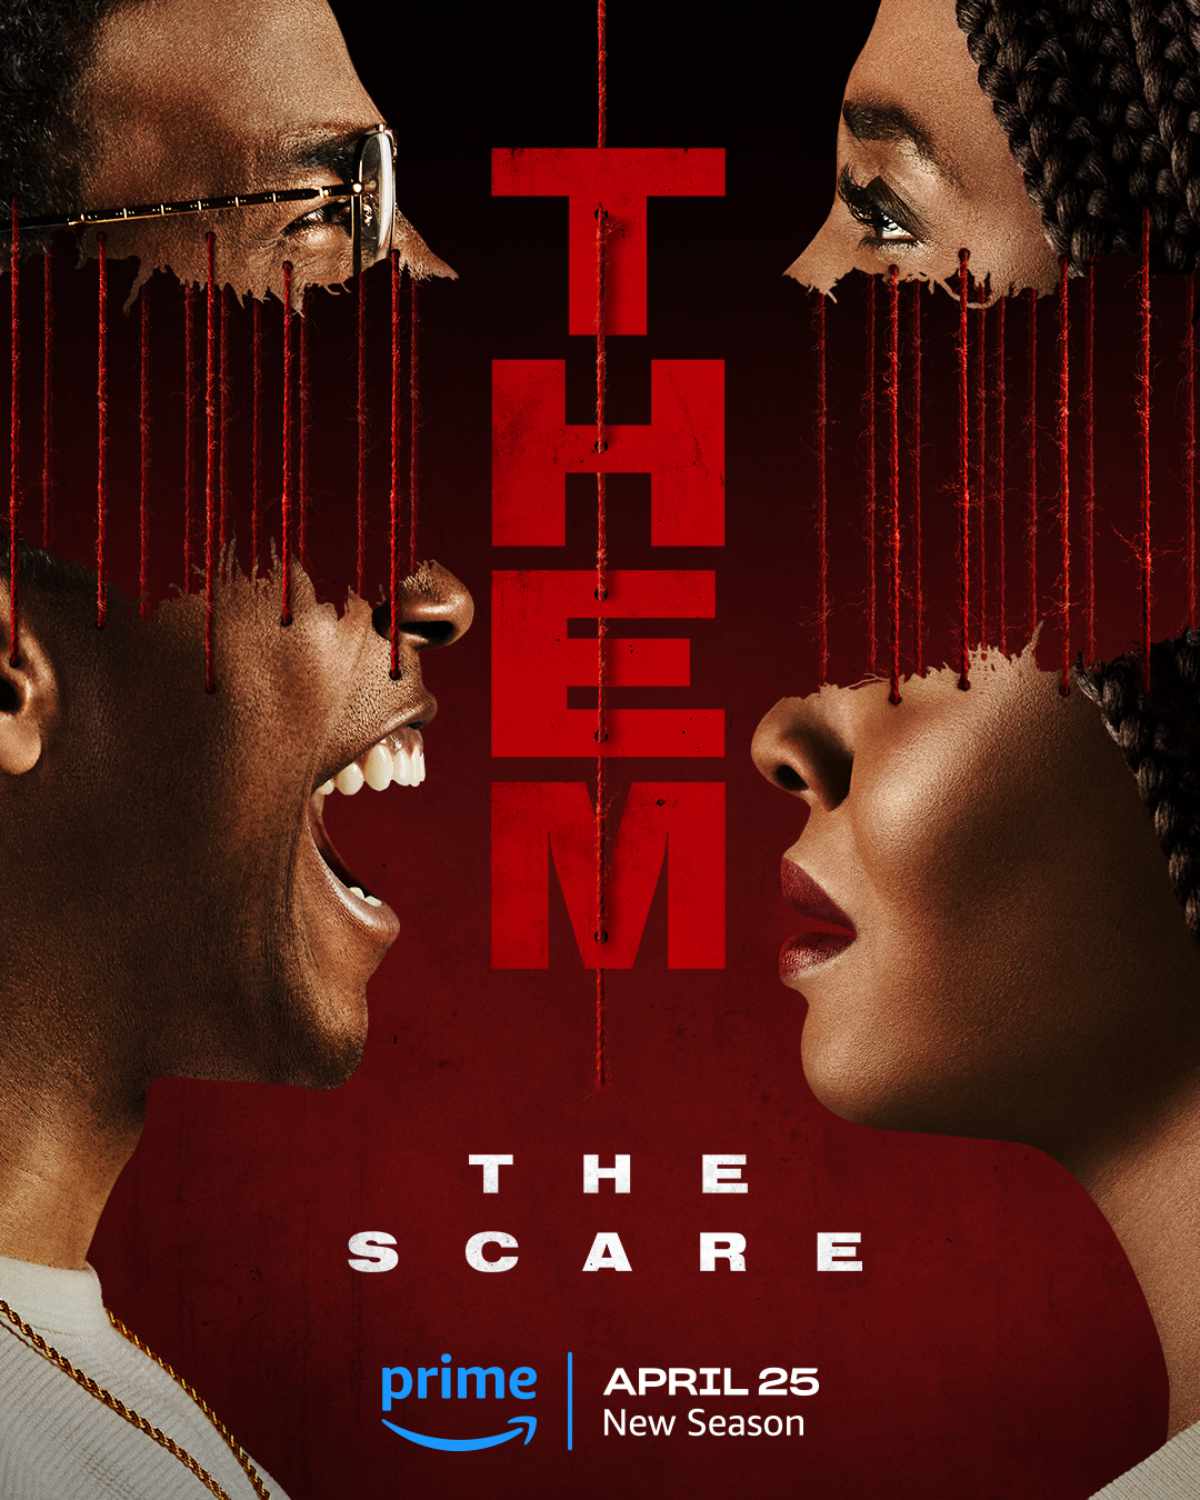 Them: The Scare Poster